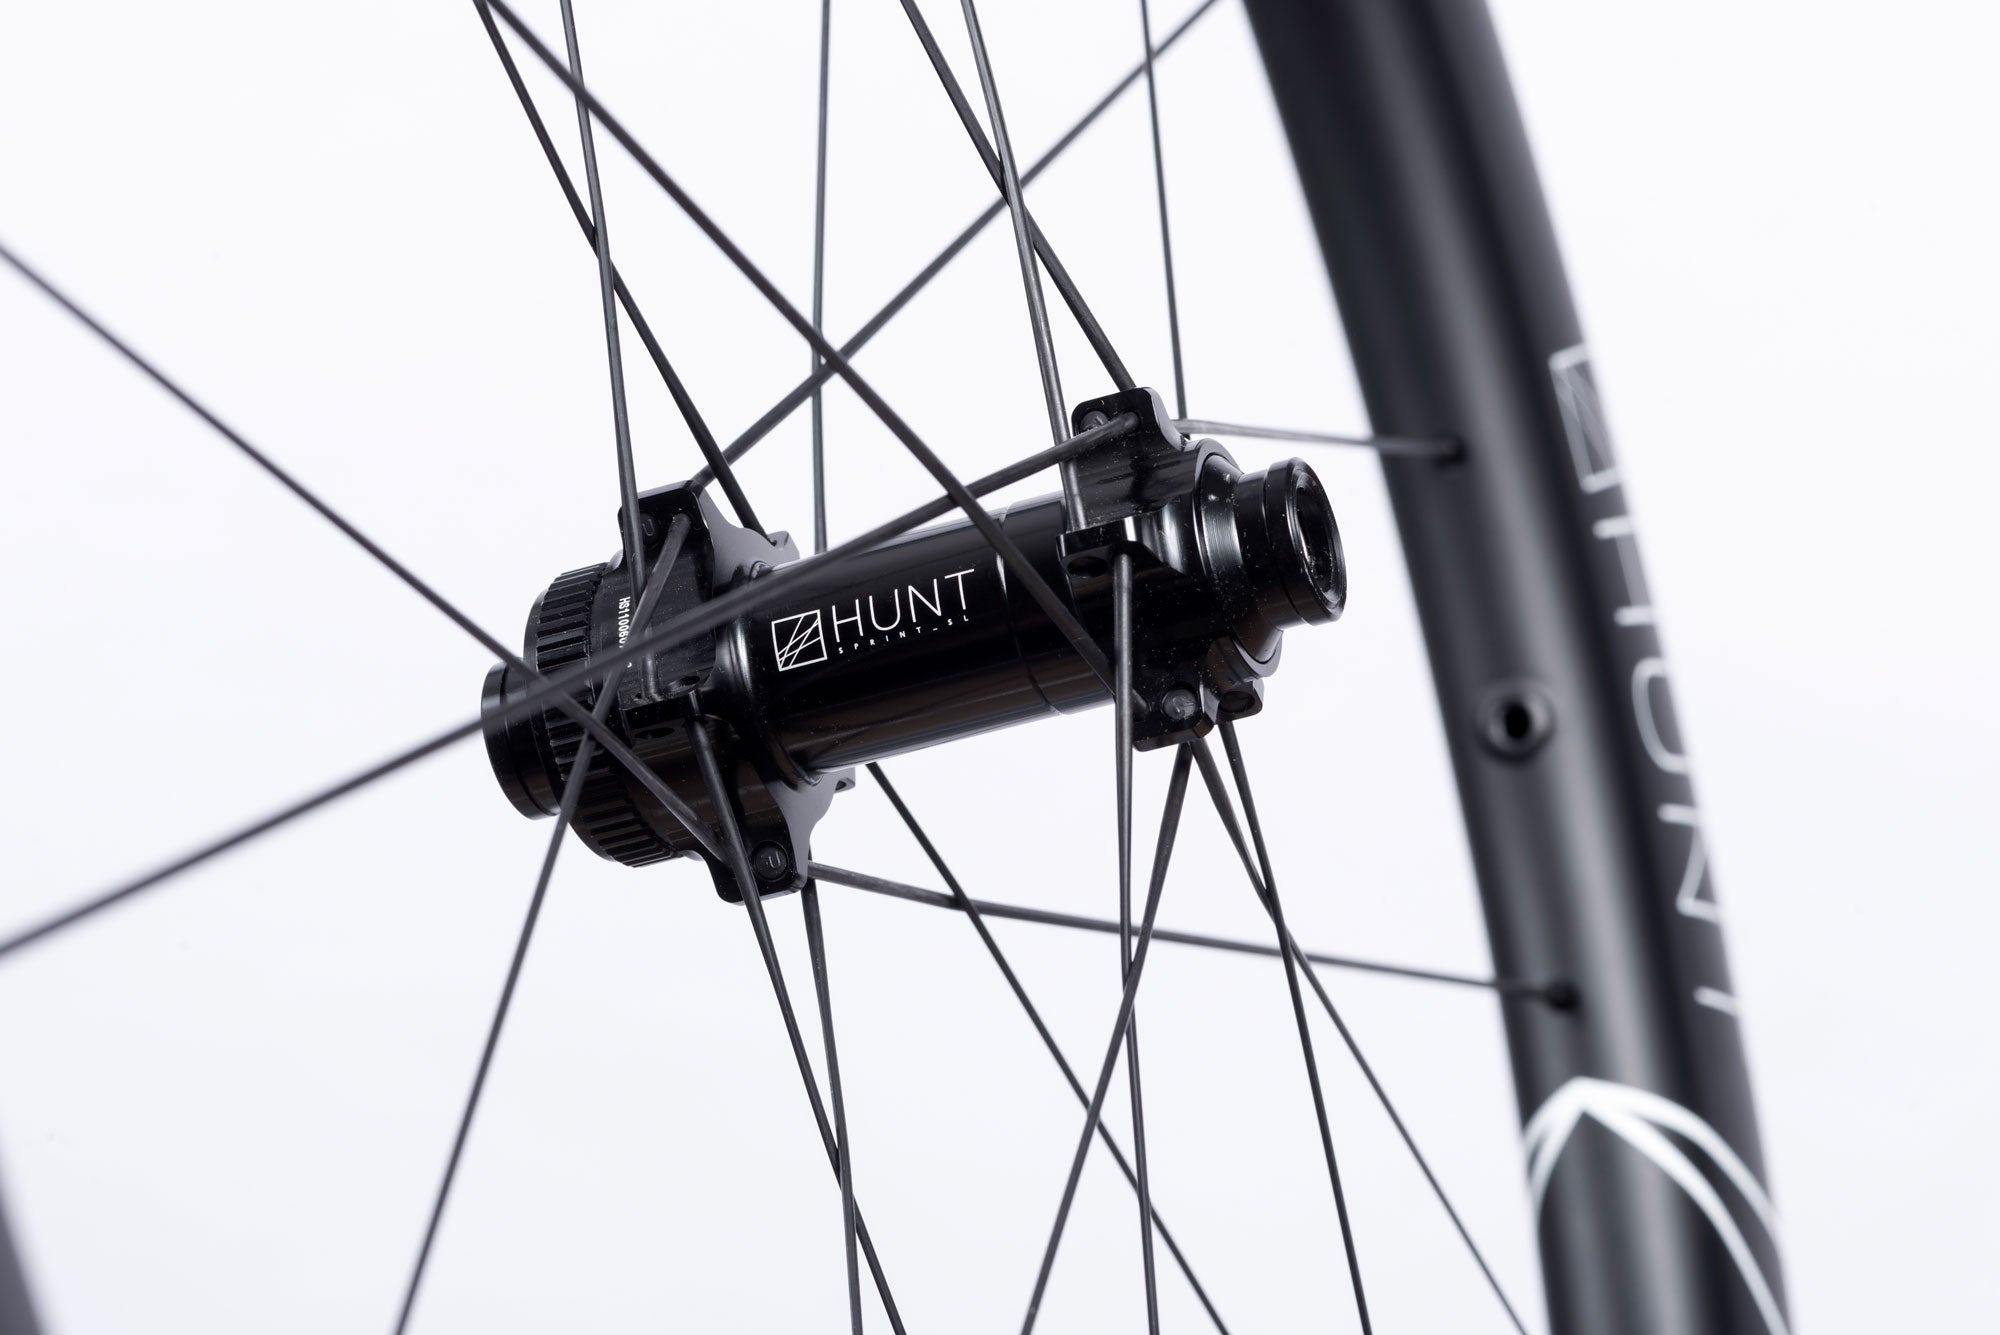 <h1>CeramicSpeed Bearings</h1><i>The 48 Limitless Aero Disc will come fully equipped with CeramicSpeed's industry-leading hybrid ceramic bearings, even in the freehub body. All CeramicSpeed Balls are of the highest quality Grade 3 Silicon Nitride, featuring the highest achievable surface finish and roundness. The quality of the balls is what determines the performance and lifetime of a bearing. The CeramicSpeed Balls feature unparalleled impact strength, smoothness, roundness and brittleness.</i>